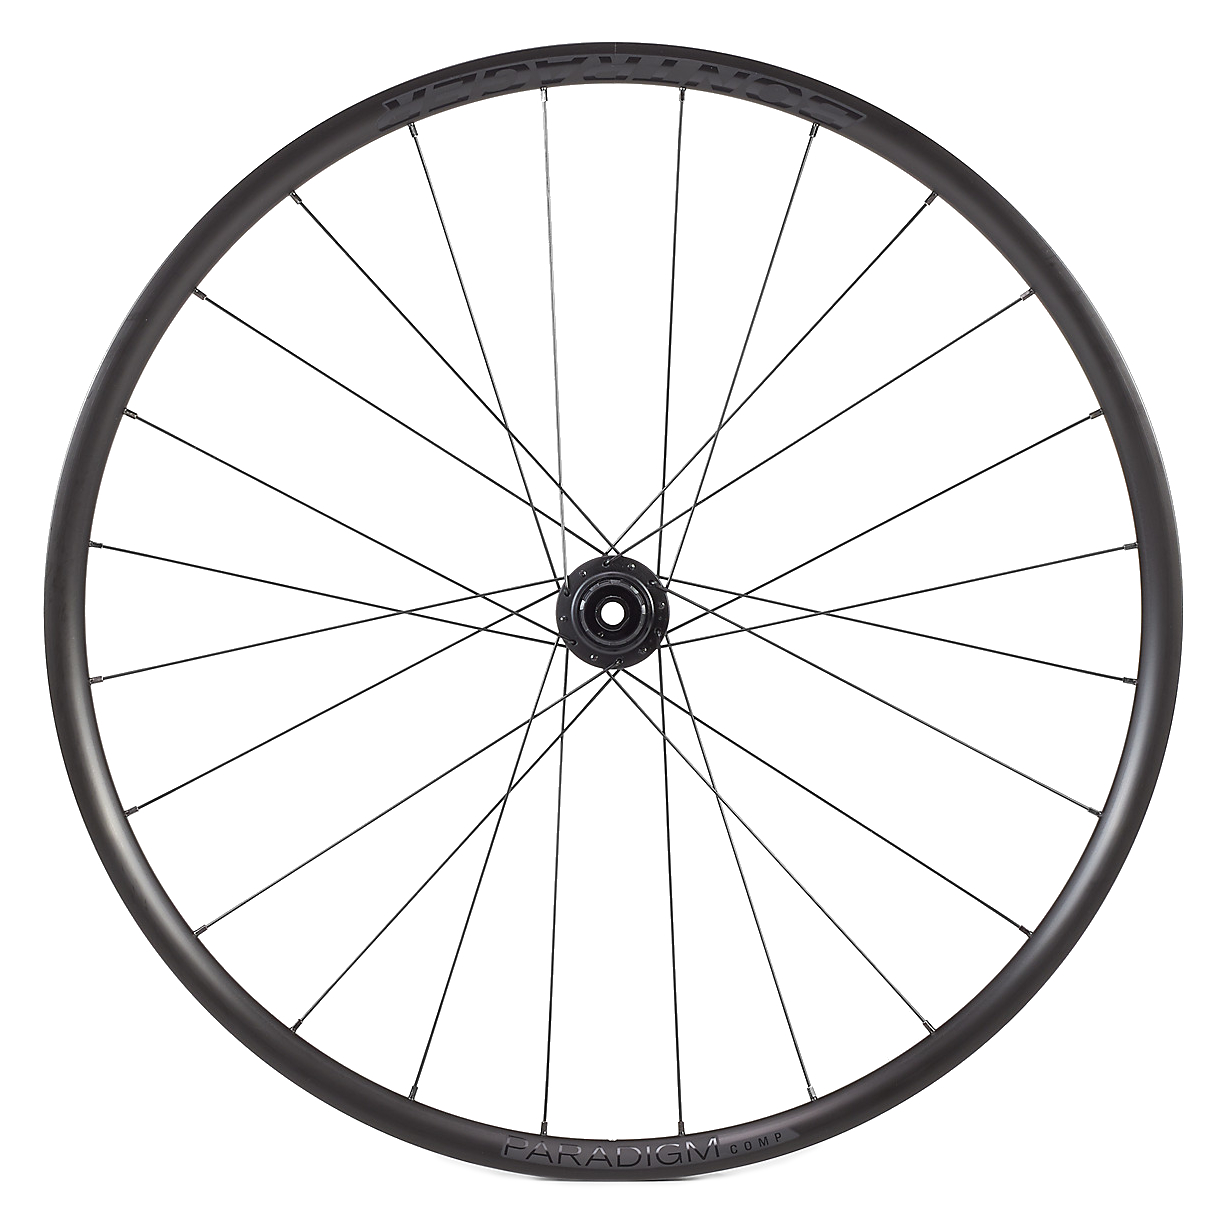 Picture of Bontrager Paradigm Comp TLR Disc Rear Wheel - Clincher / Tubeless - Centerlock - 12x142mm - Shimano HG